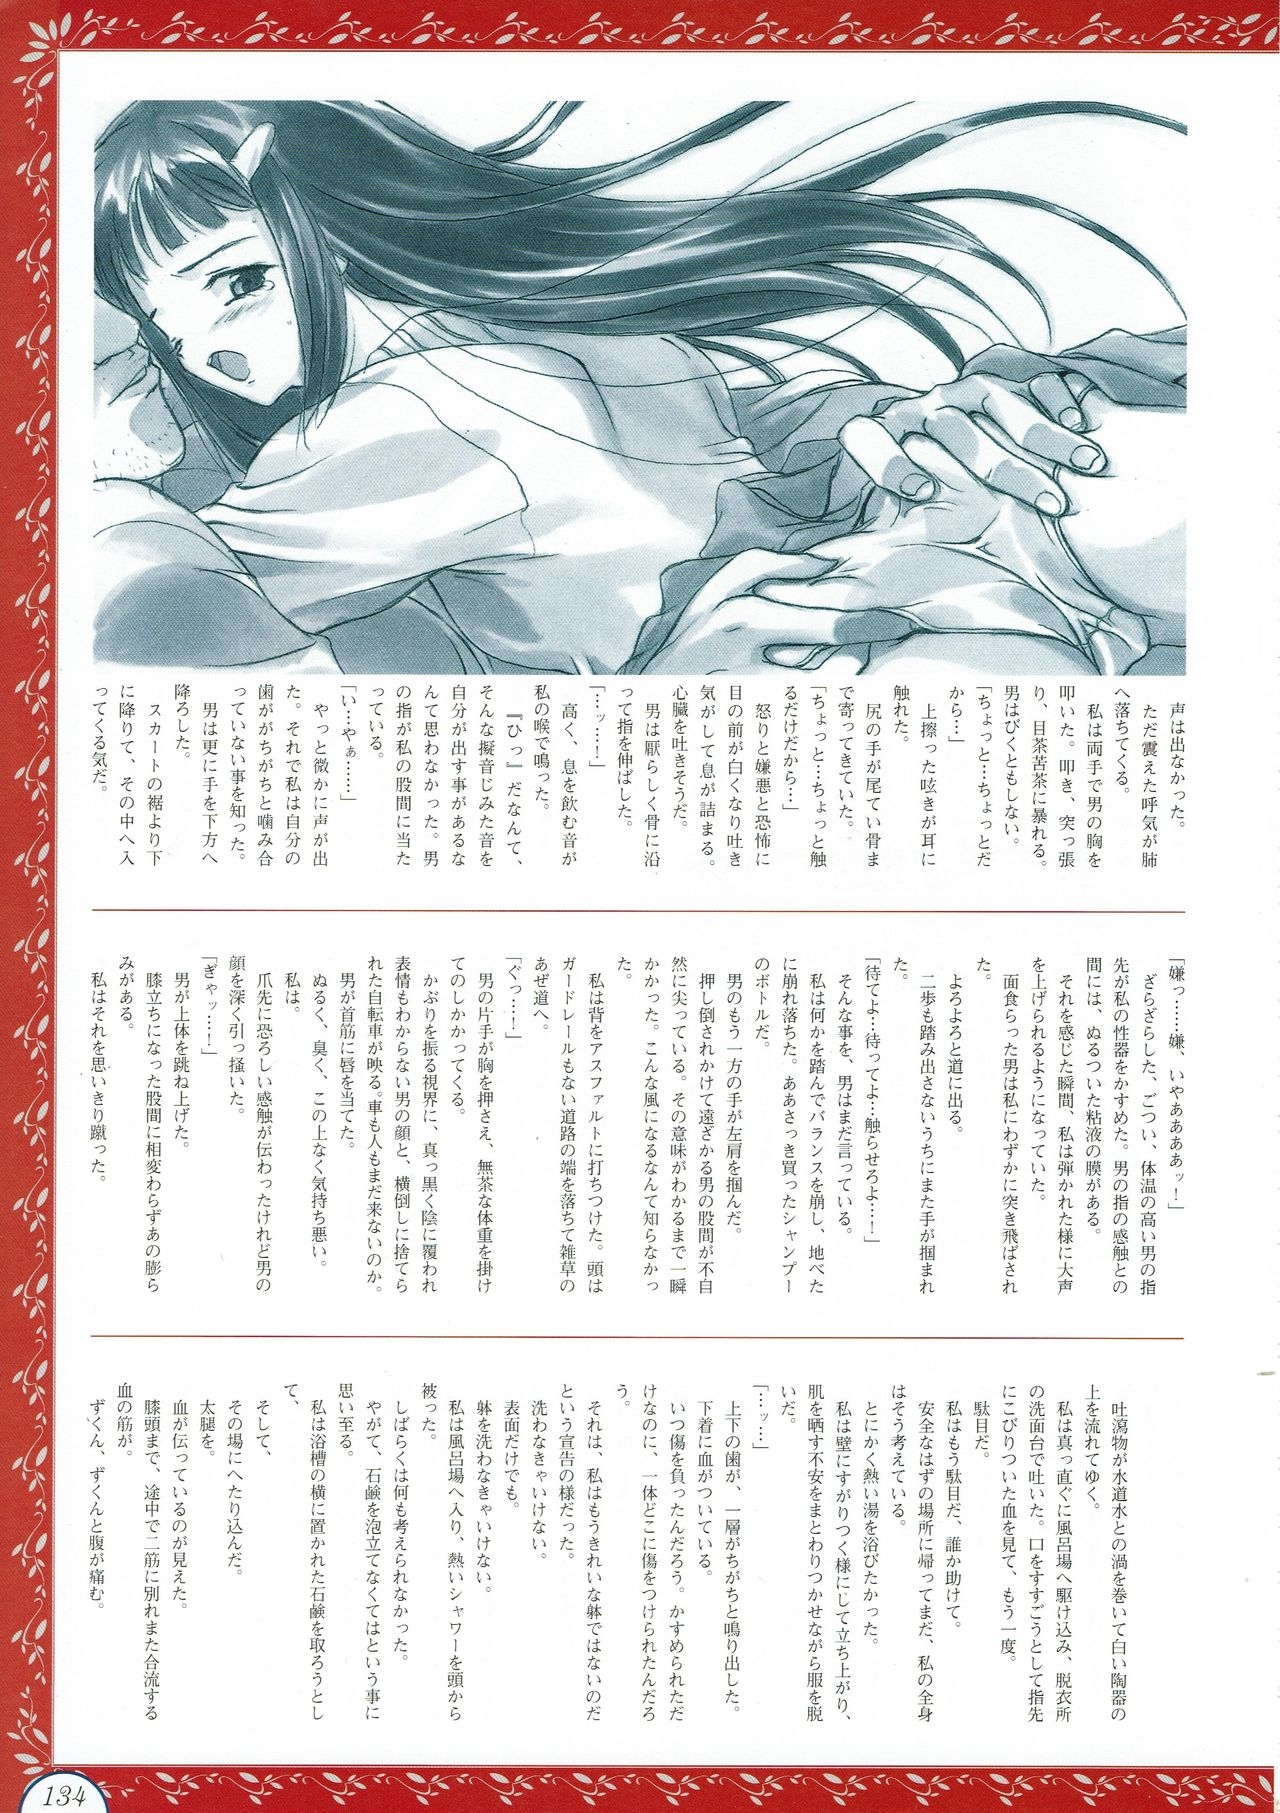 Alice no Yakata 456 Official Guide 135